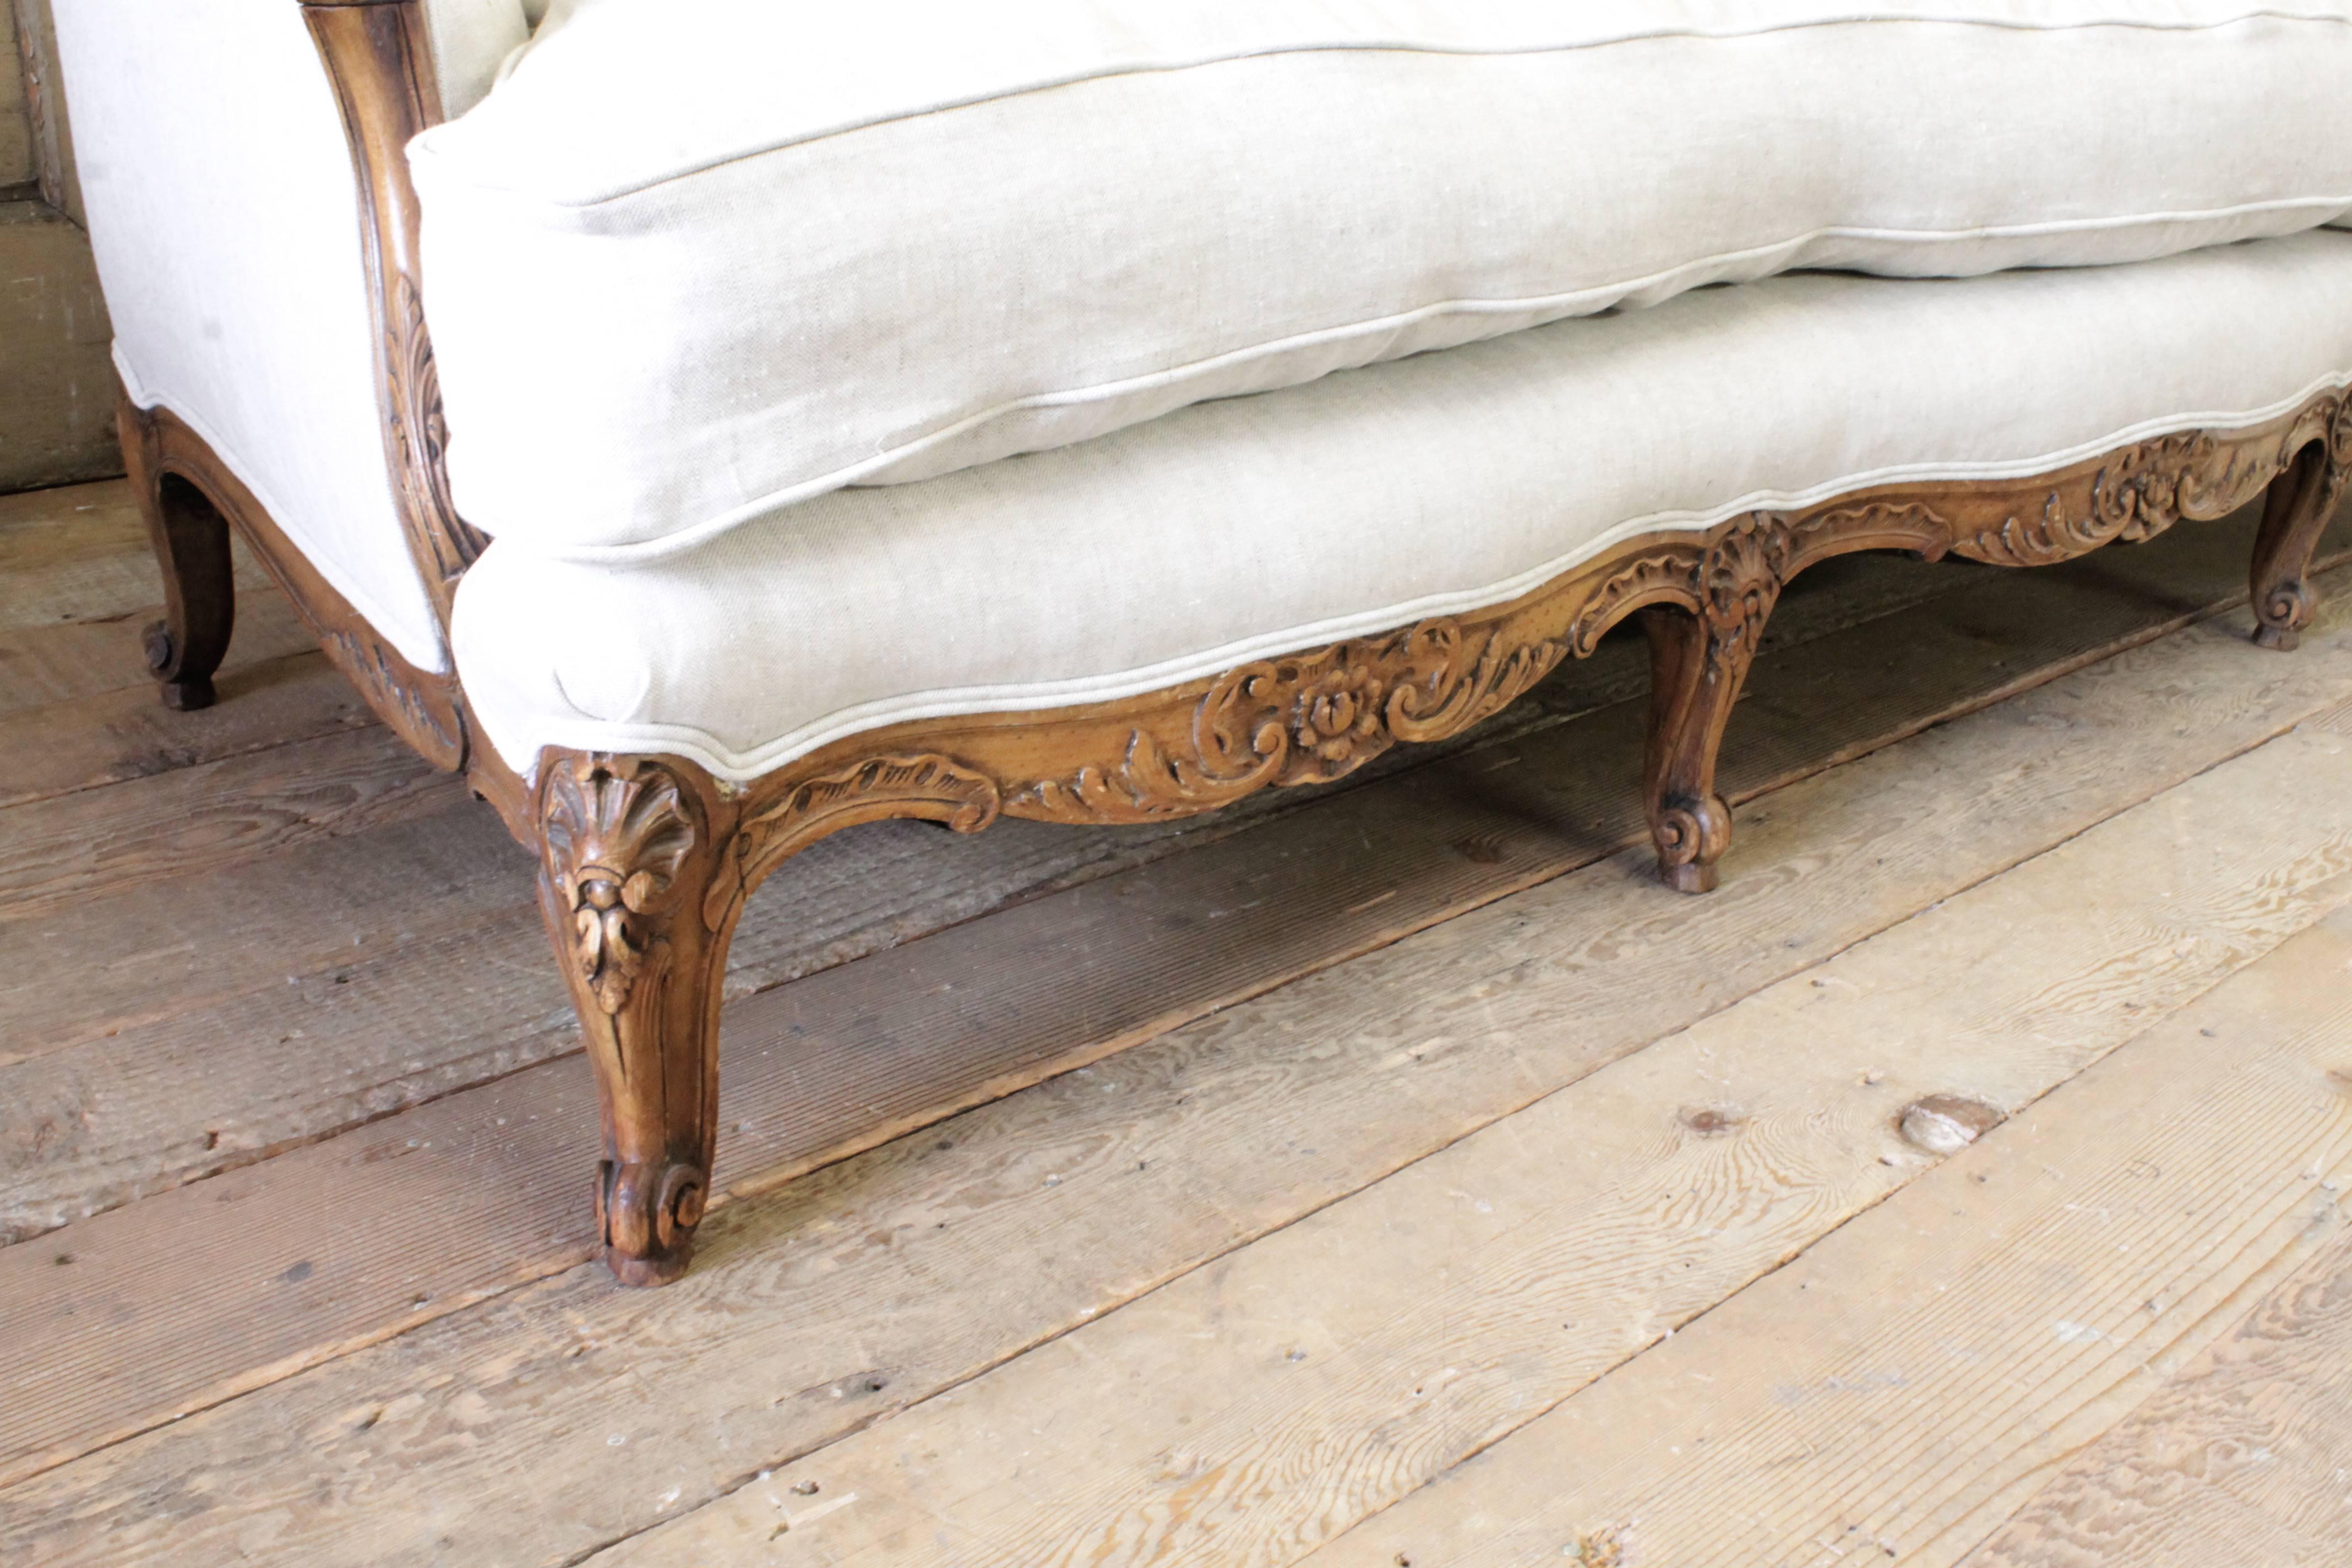 Classic Louis XV French Country style sofa, in a natural 15oz Belgian linen. The seat is a down wrapped, foam core. Very comfortable to sit in. Seat is slip covered, it can be removed to wash when needed. Legs are solid and sturdy.